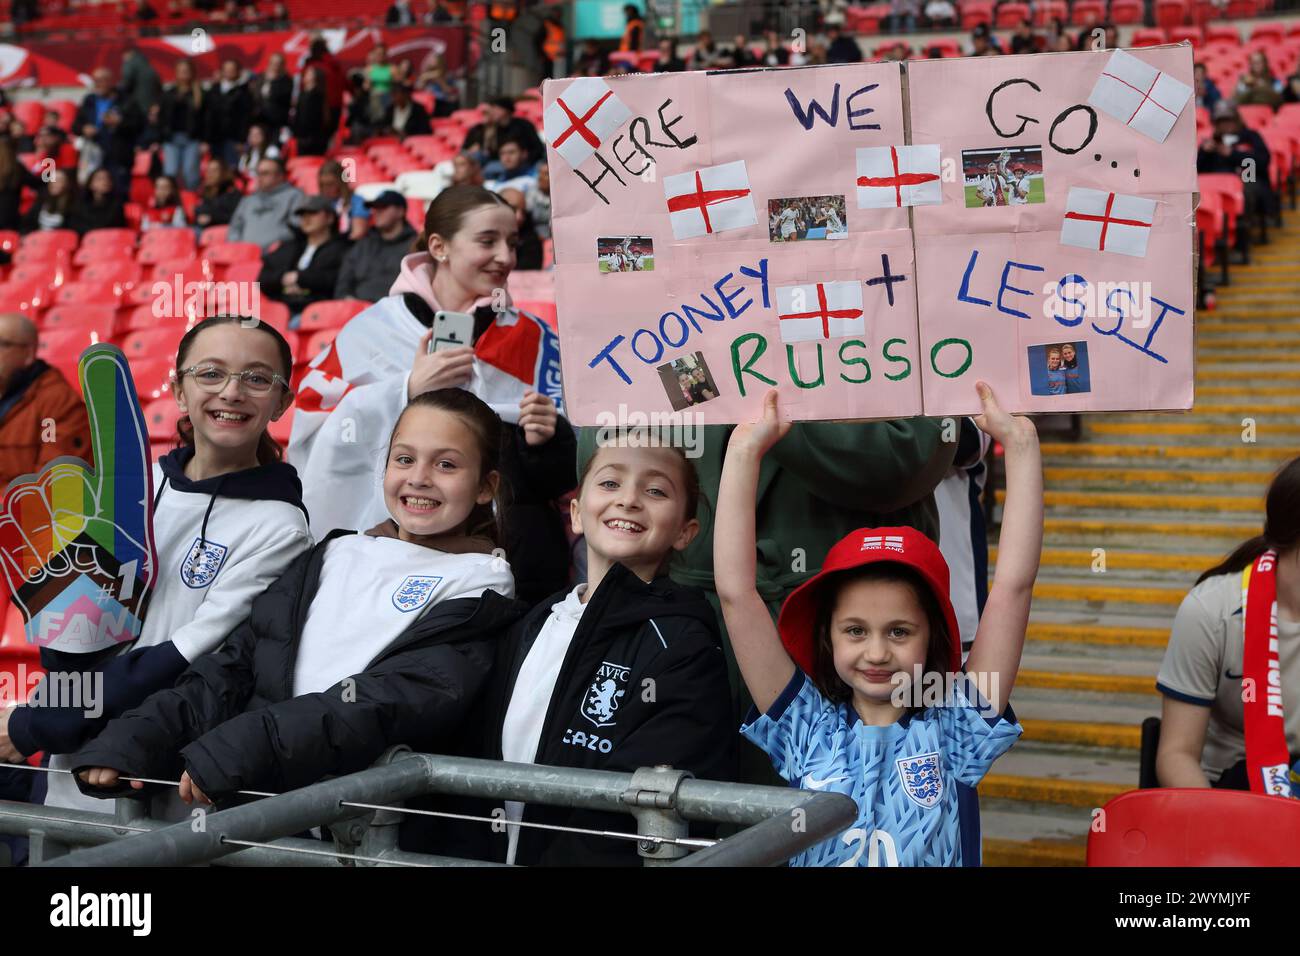 Young girl fan holds Tooney and Lessi Russo placard England v Sweden UEFA Women's Euro football qualifier Wembley Stadium, London, 5 April 2024 Stock Photo